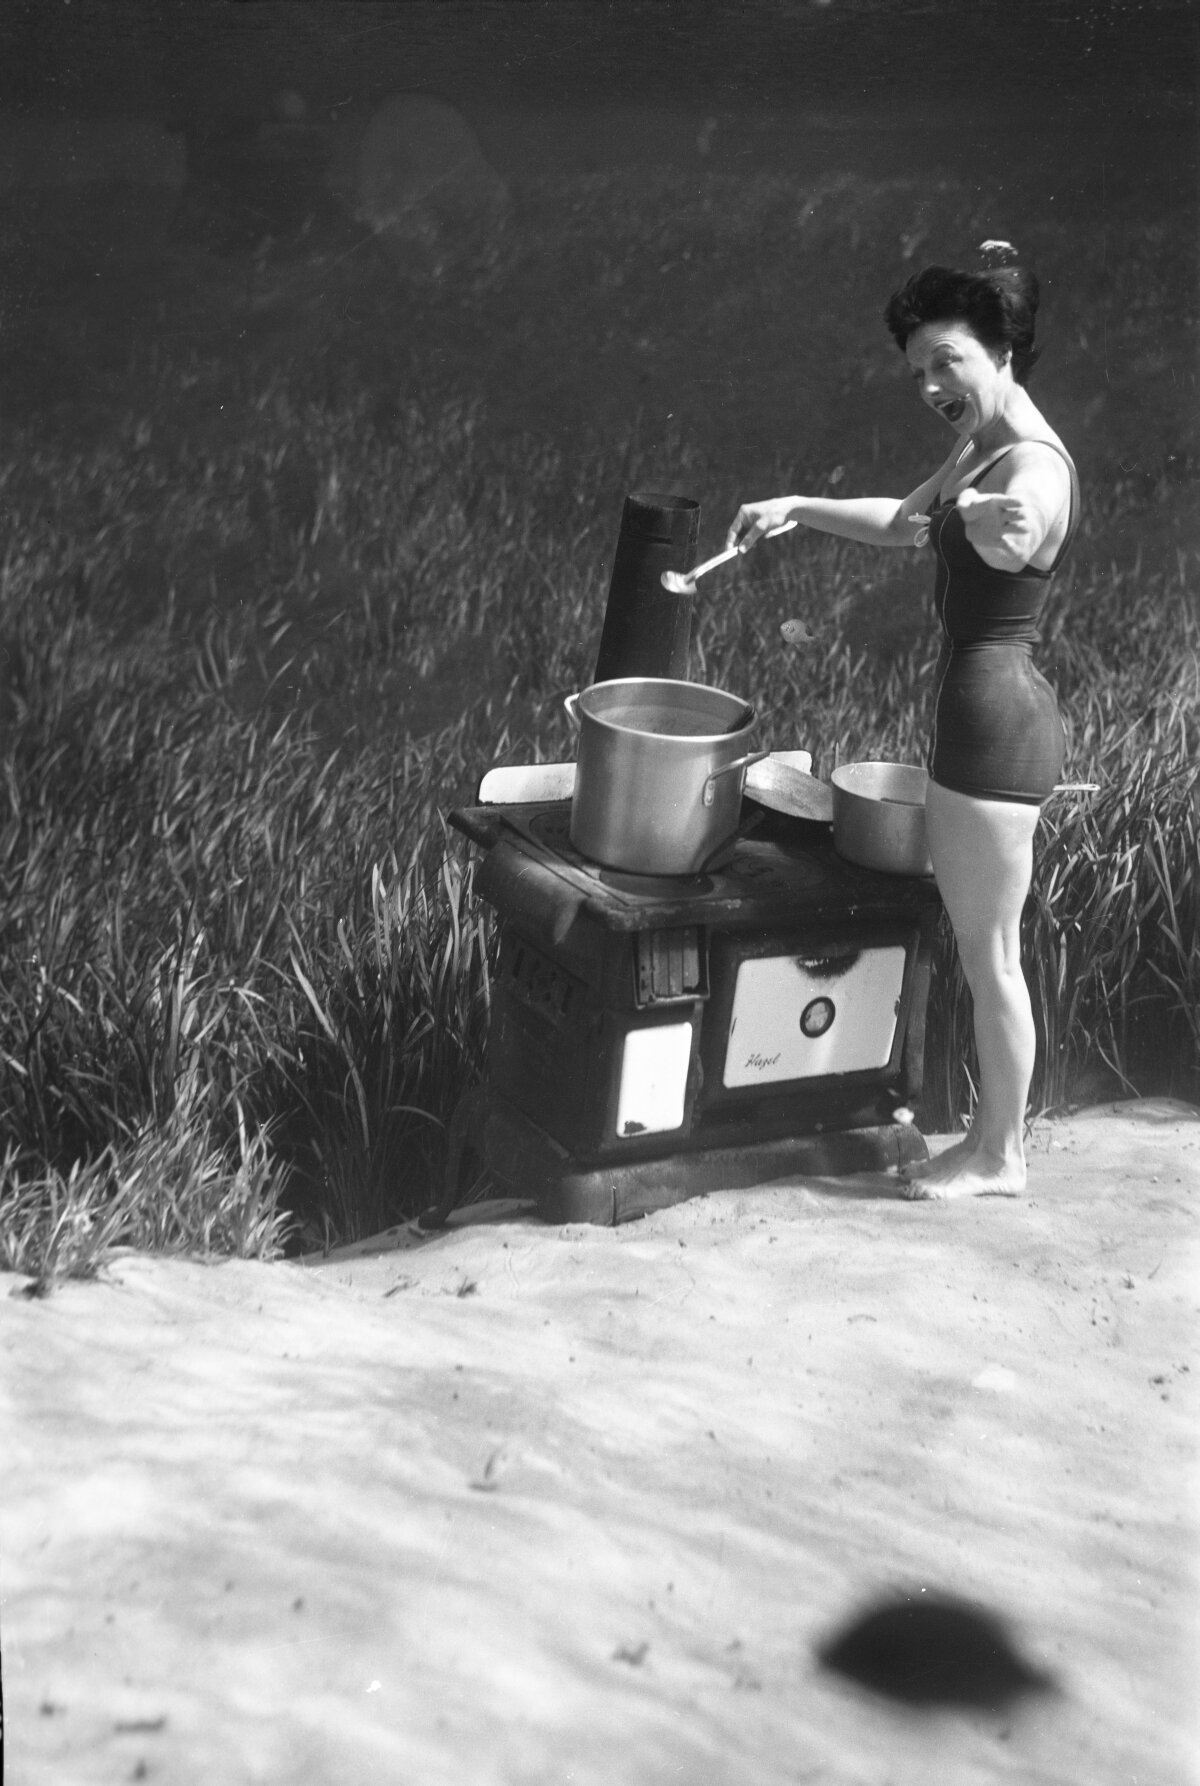 Model cooking on the stove underwater at Silver Springs.